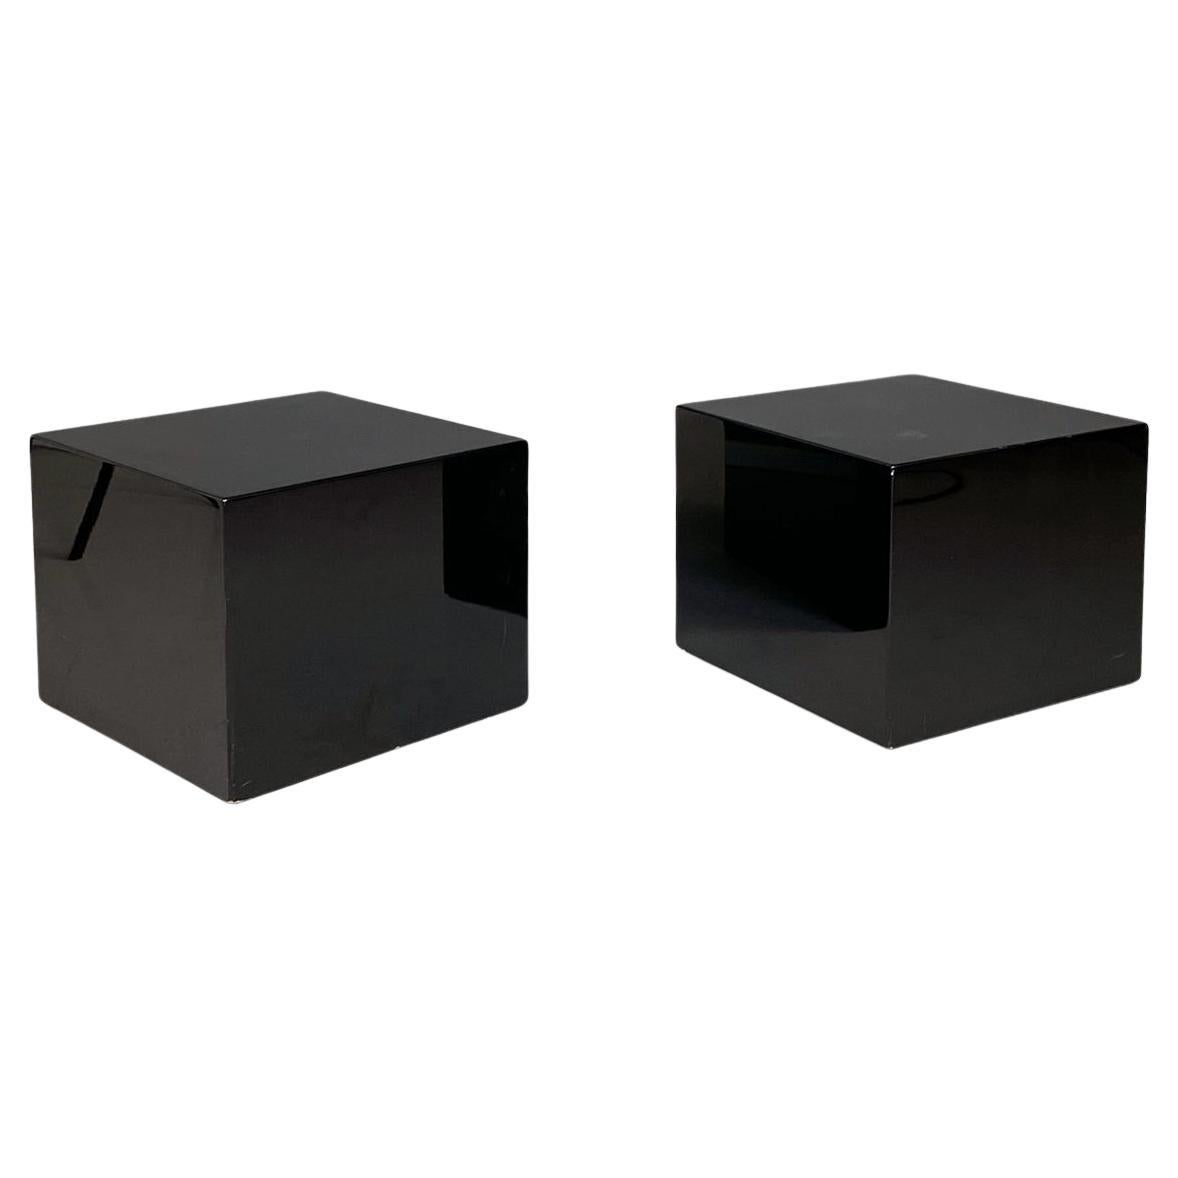 Italian Modern Stand or Coffee Tables in Black Lacquered Wood, 1990s For Sale